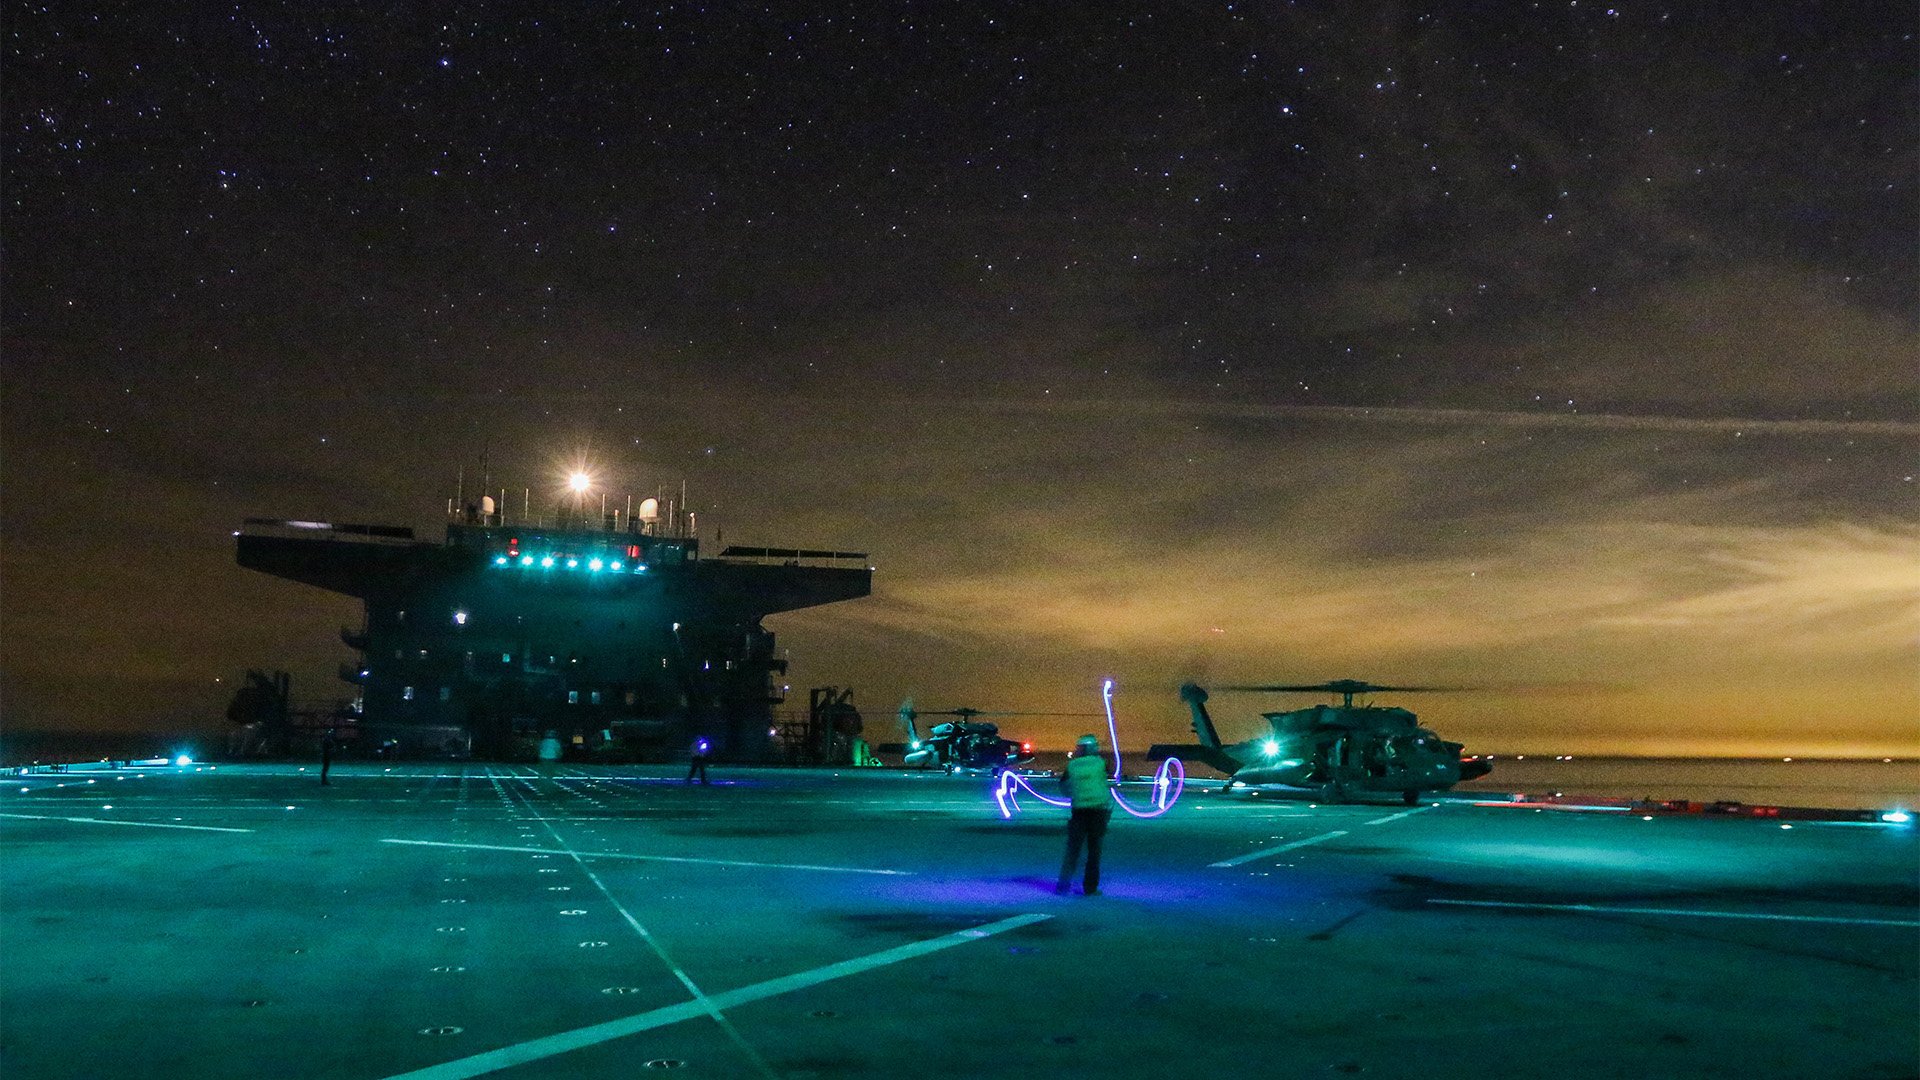 US Army soldiers from the 1-108th Assault Helicopter Battalion, Kansas Army National Guard, conduct day and night deck landing qualifications with UH-60 Black Hawk helicopters on board the US Navy's expeditionary sea base Lewis B. Puller in the Persian Gulf on March 29, 2019. US Central Command claims an Iranian gunboat tried to blind Lewis B. Puller's bridge with a spotlight on Dec. 5, 2022, in the Strait of Hormuz. US Army National Guard photo by Sgt. Emily Finn.